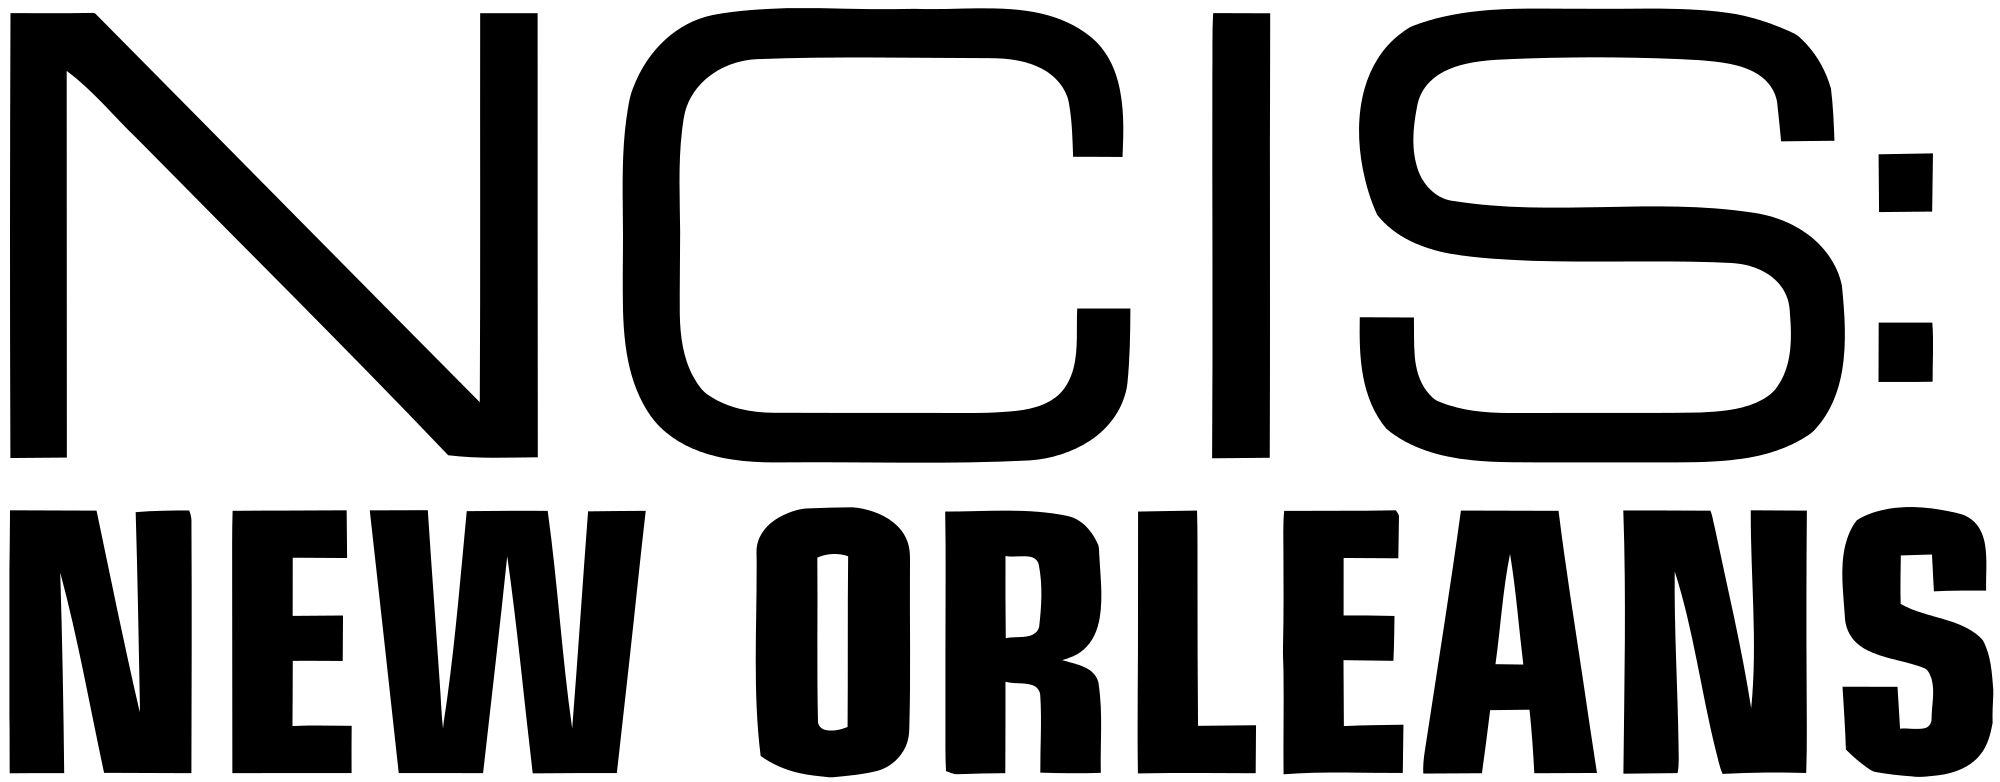 New Orleans Logo - NCIS- New Orleans